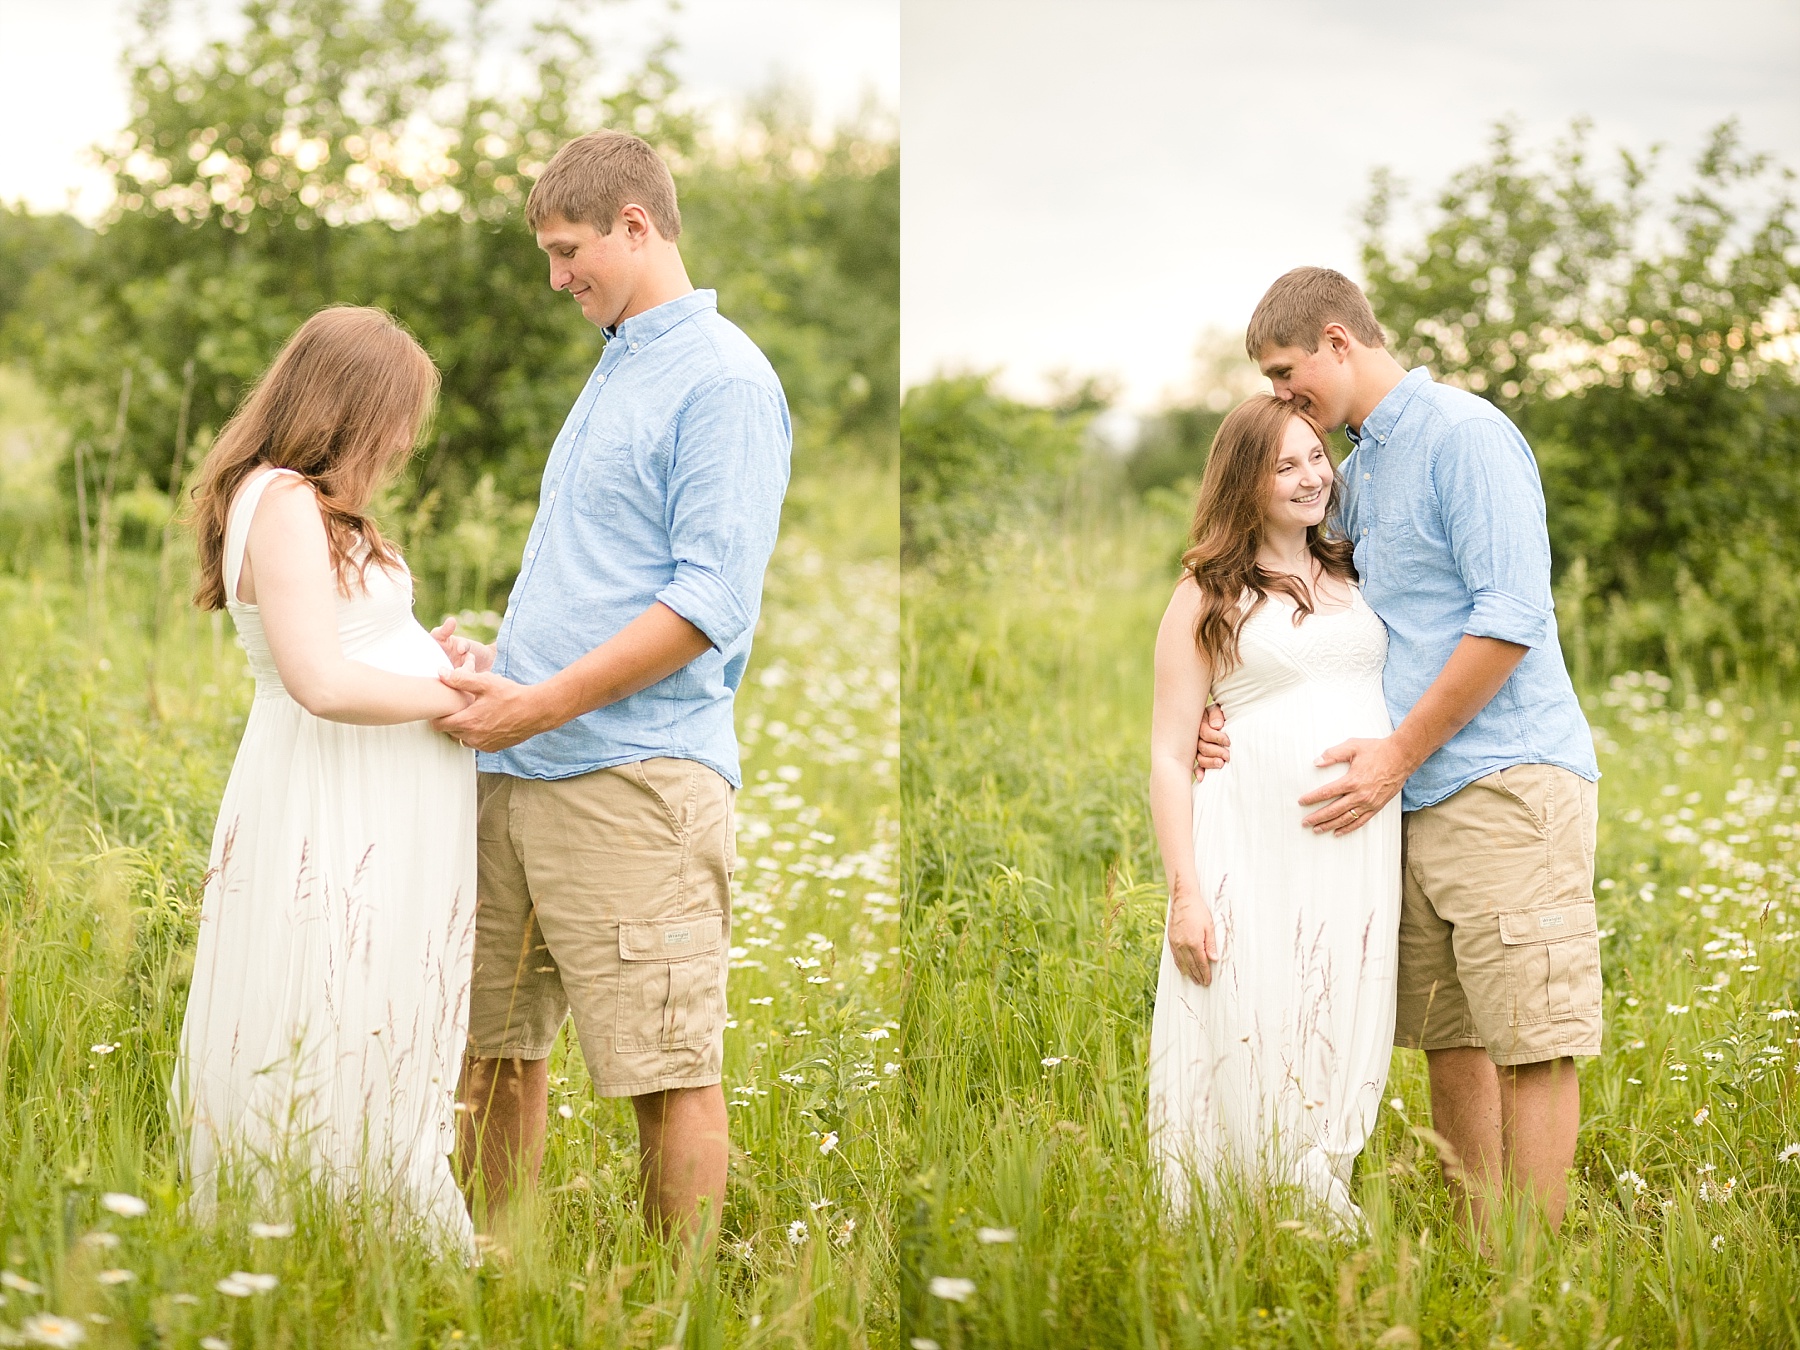 They walked through fields of daisies as the rain started to softly fall for this Wisconsin maternity session.